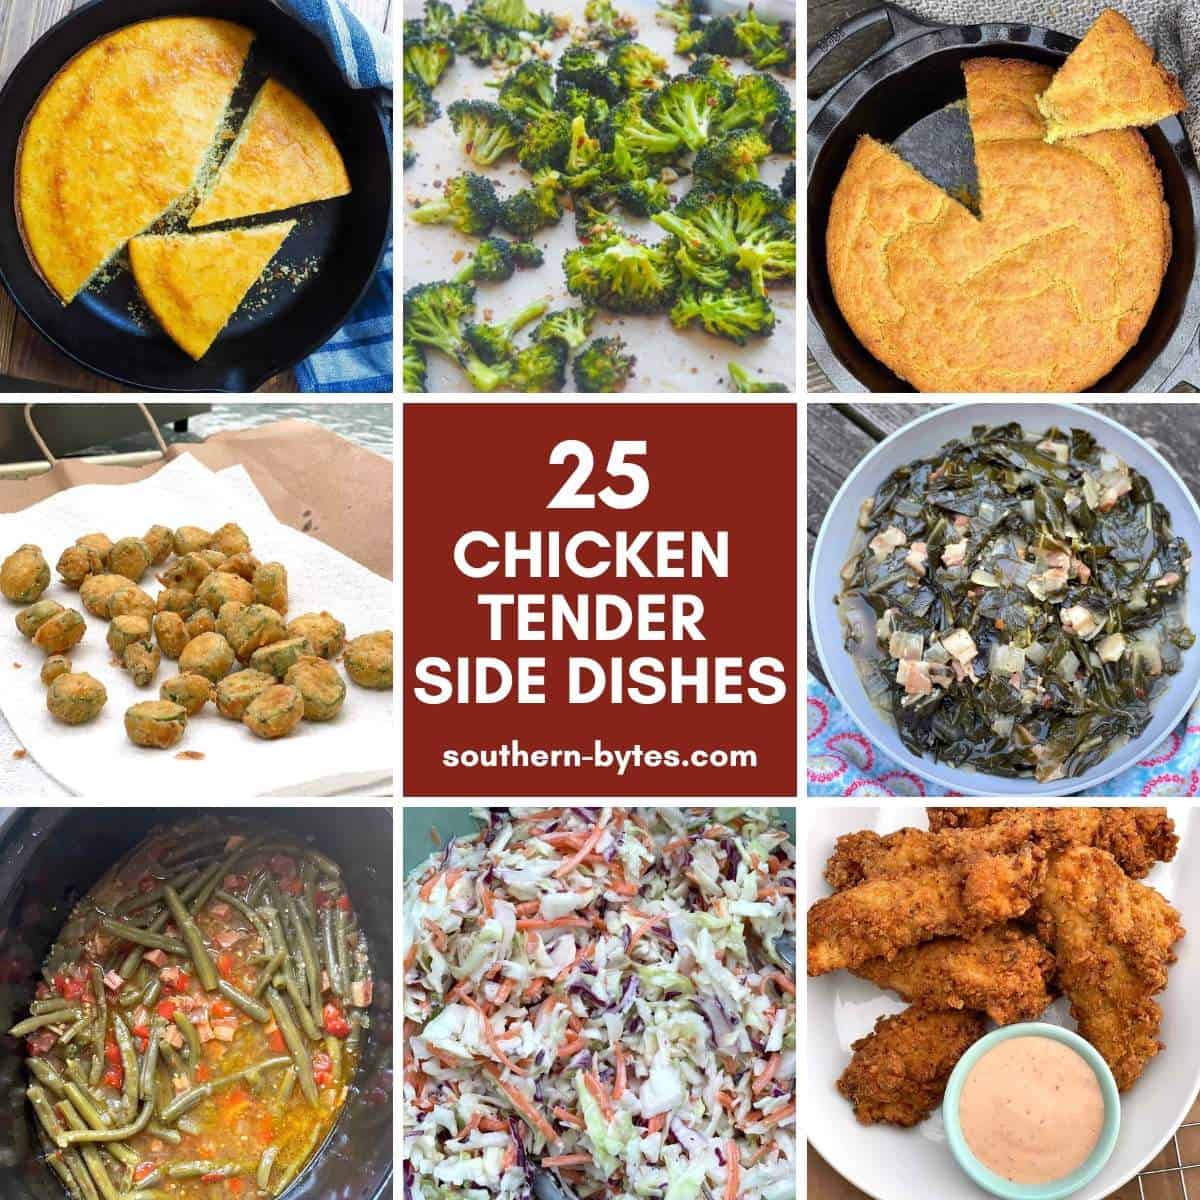 A collage of images showing chicken tender side dishes.